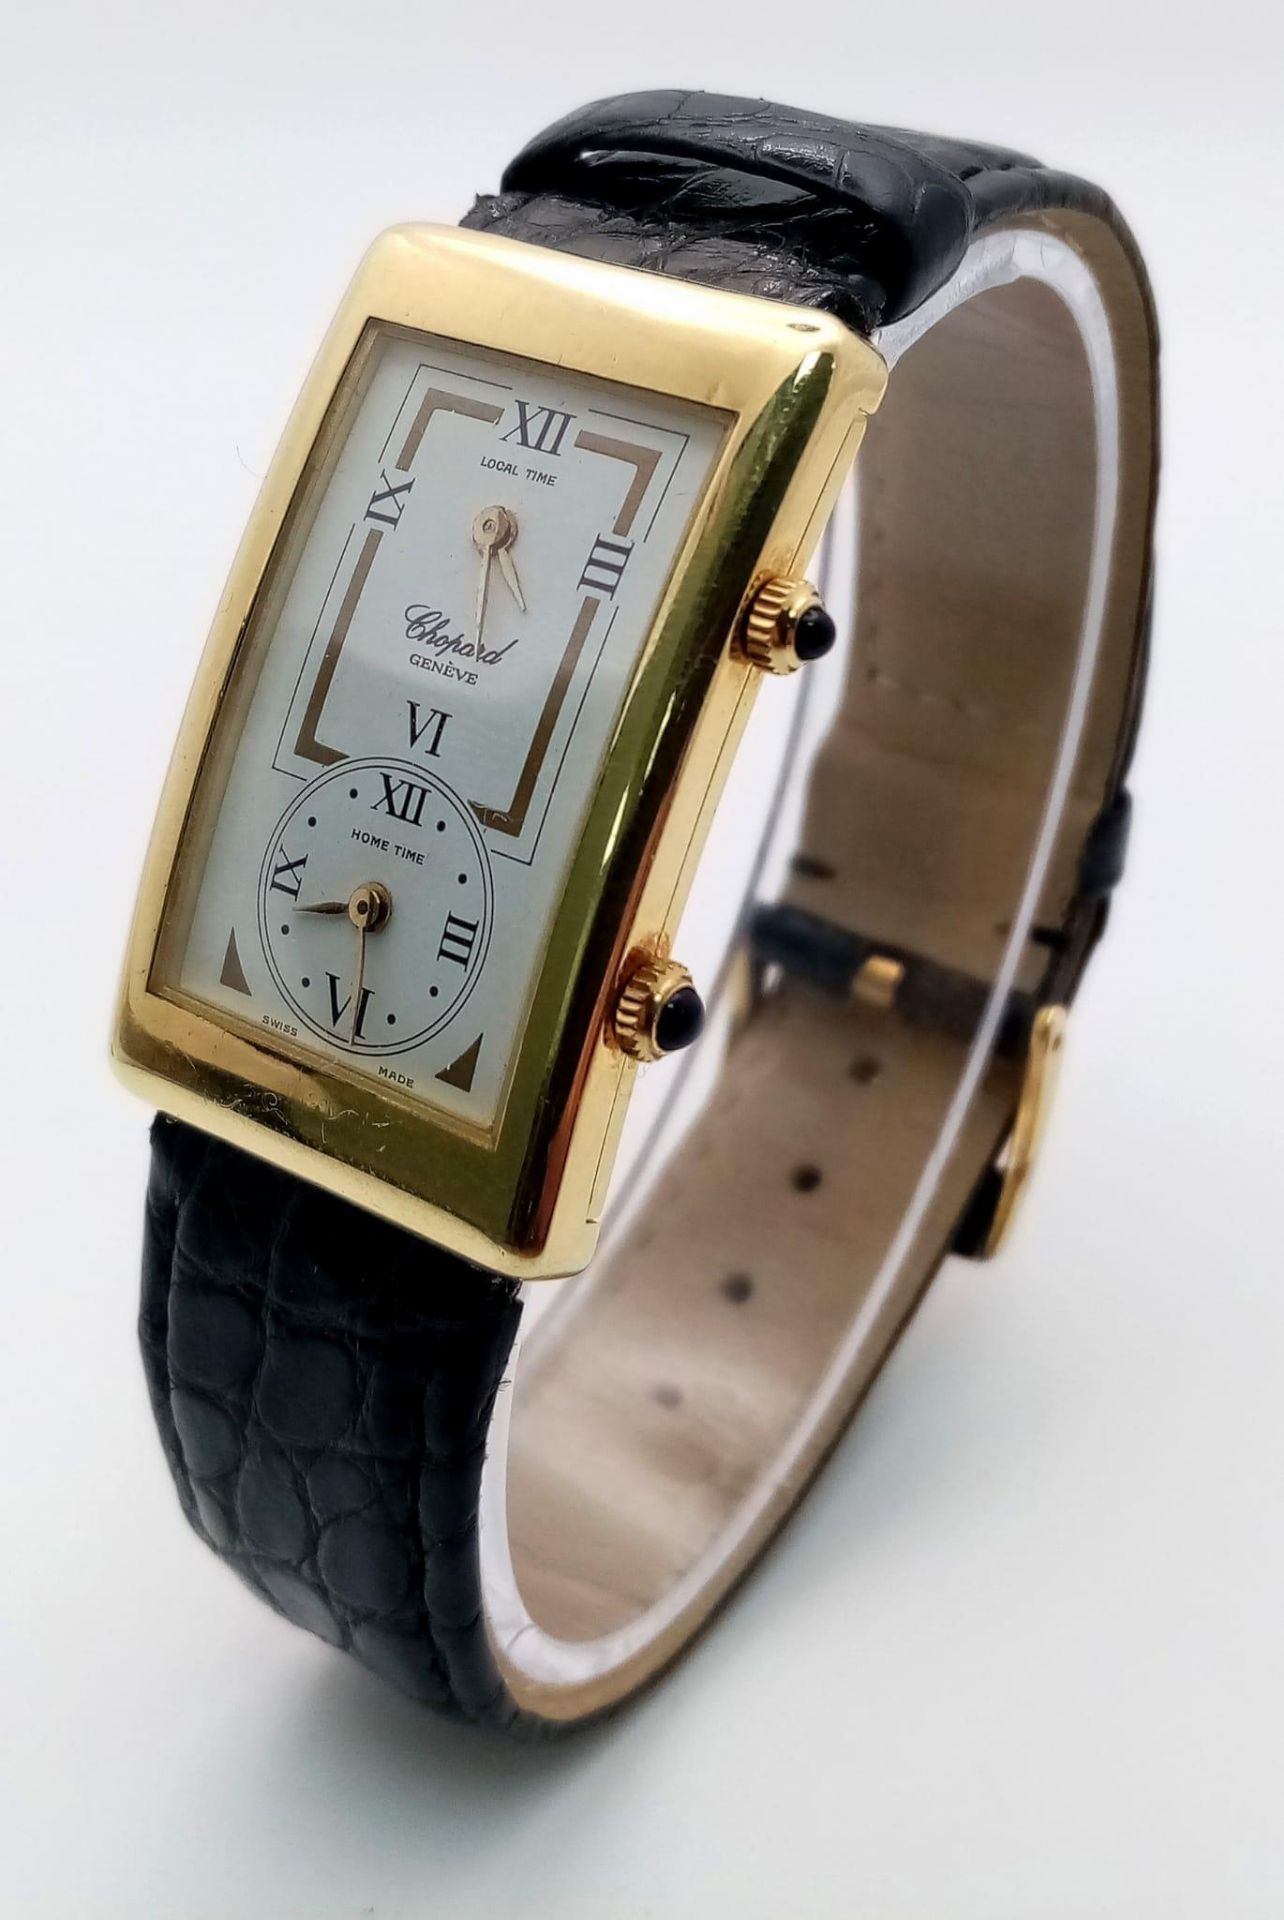 A Chopard 18K Gold Home Time (Dual Time) Gents Watch. Black leather strap. 18K gold rectangular case - Image 4 of 15